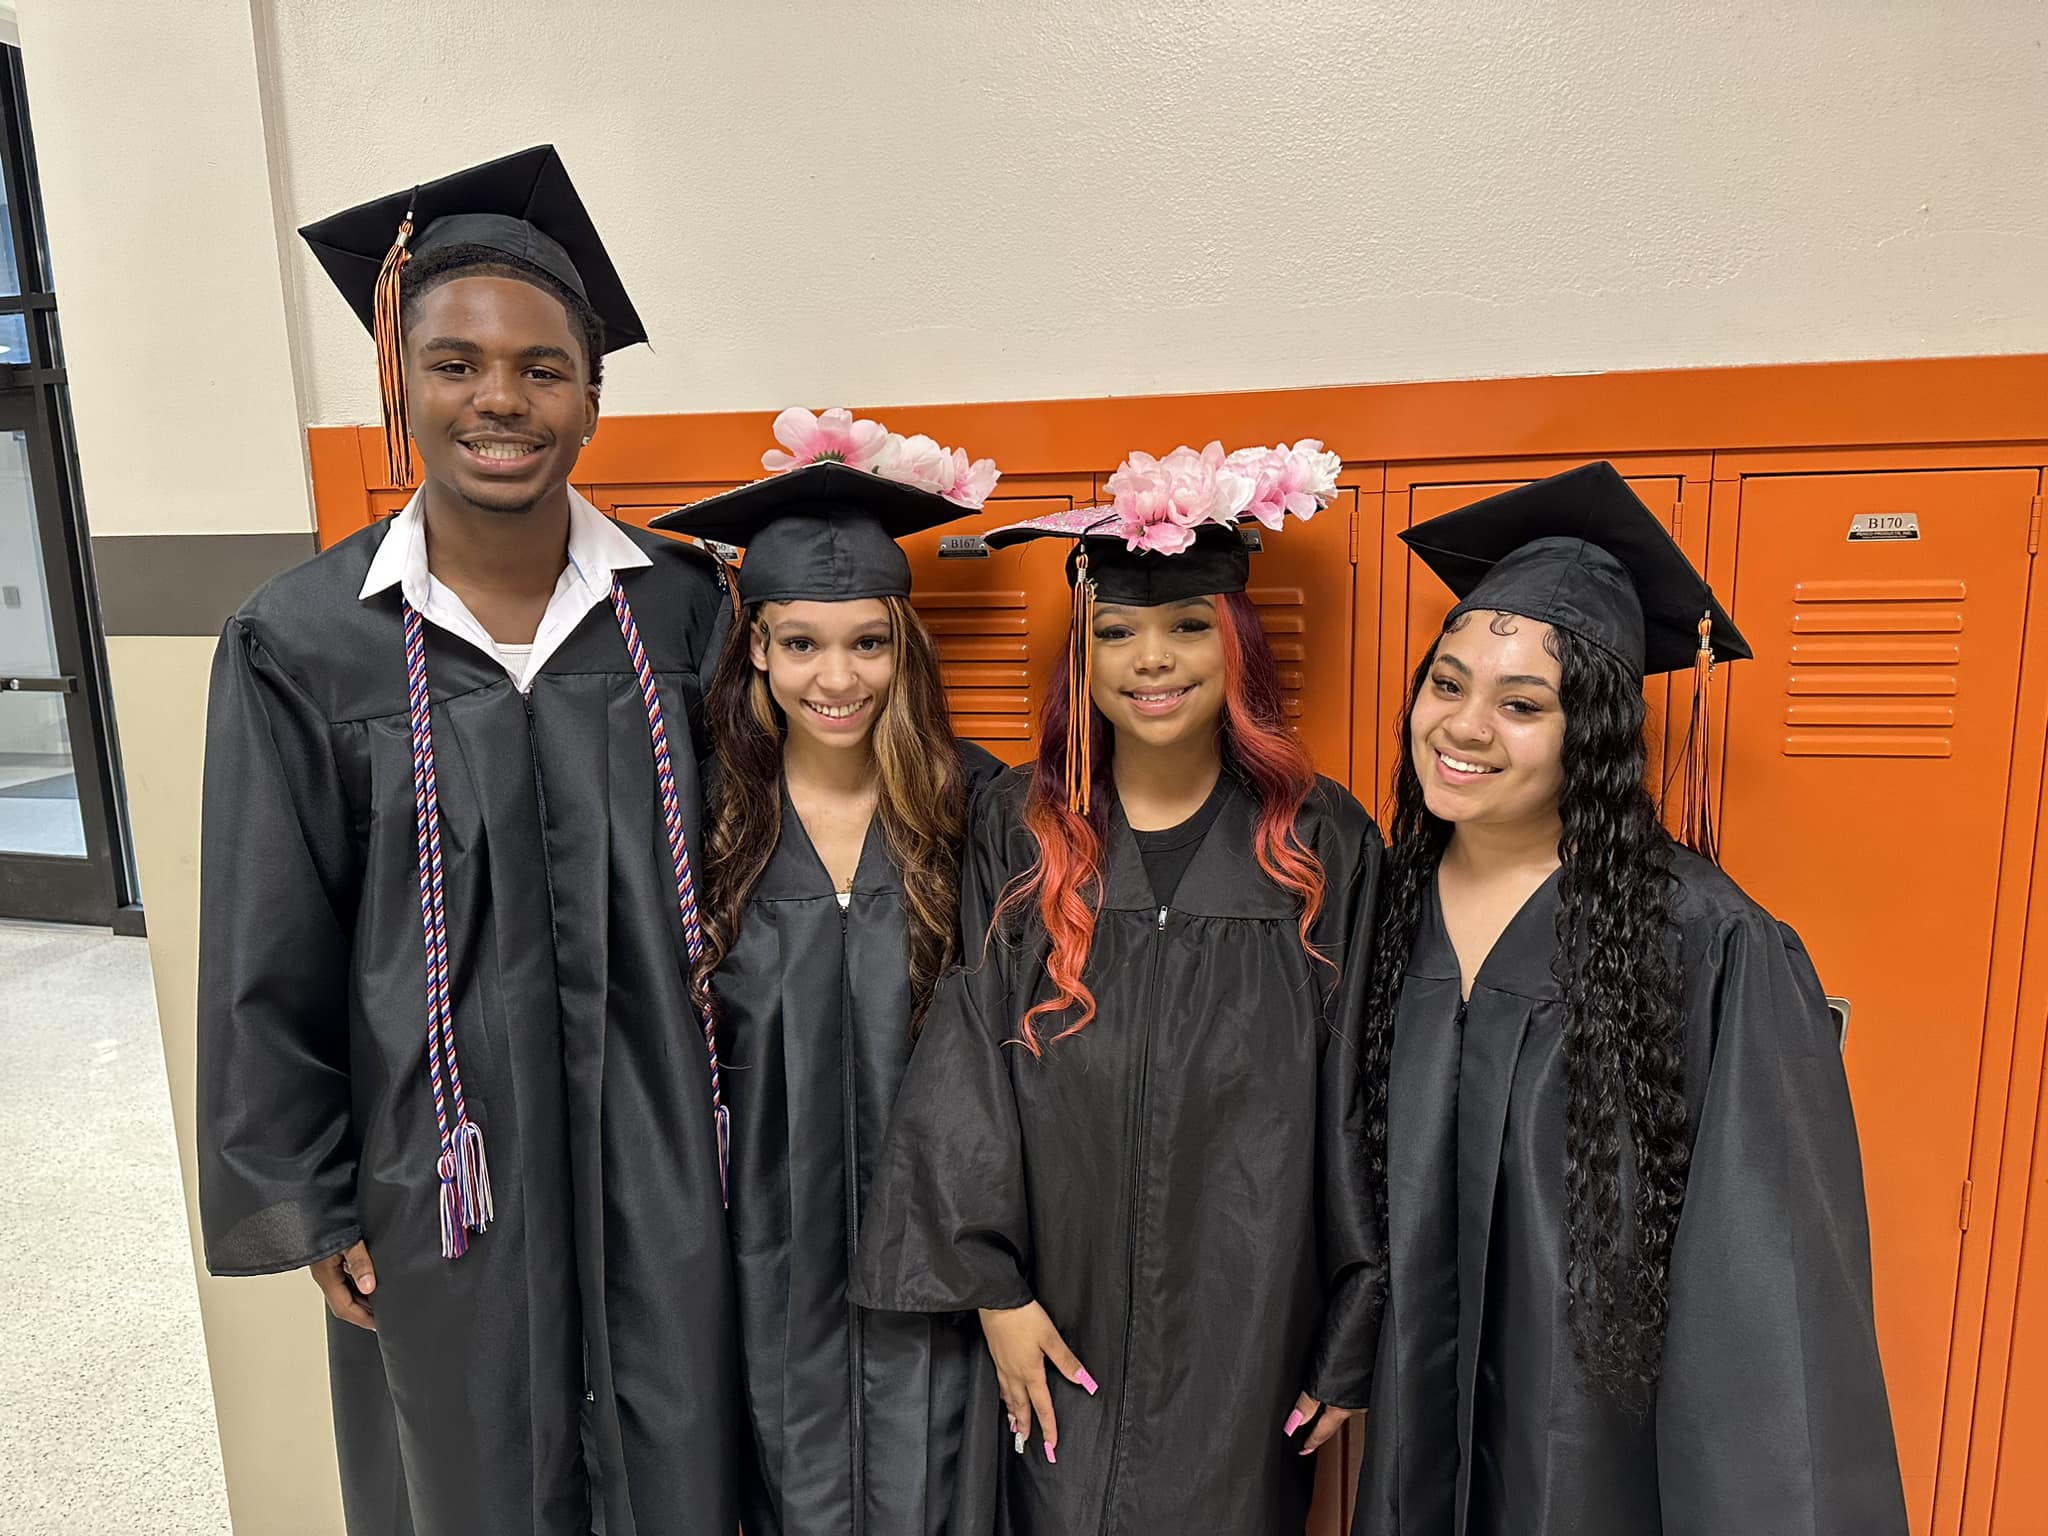 Graduates pose for a picture in the hallway at graduation